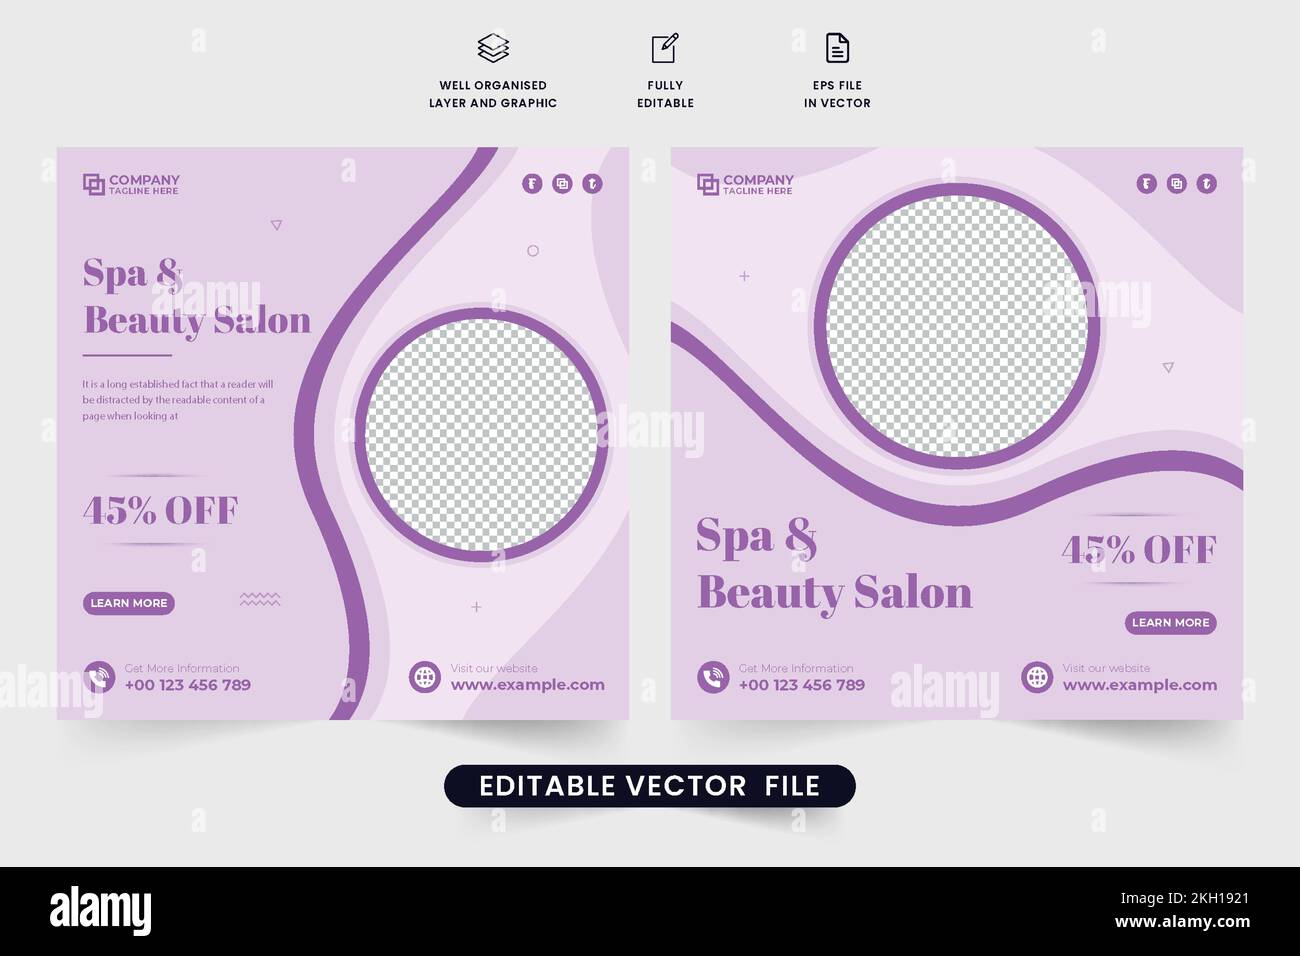 Beauty salon social media post vector with purple colors. Modern spa center advertisement template design with abstract shapes. Beauty and body treatm Stock Vector